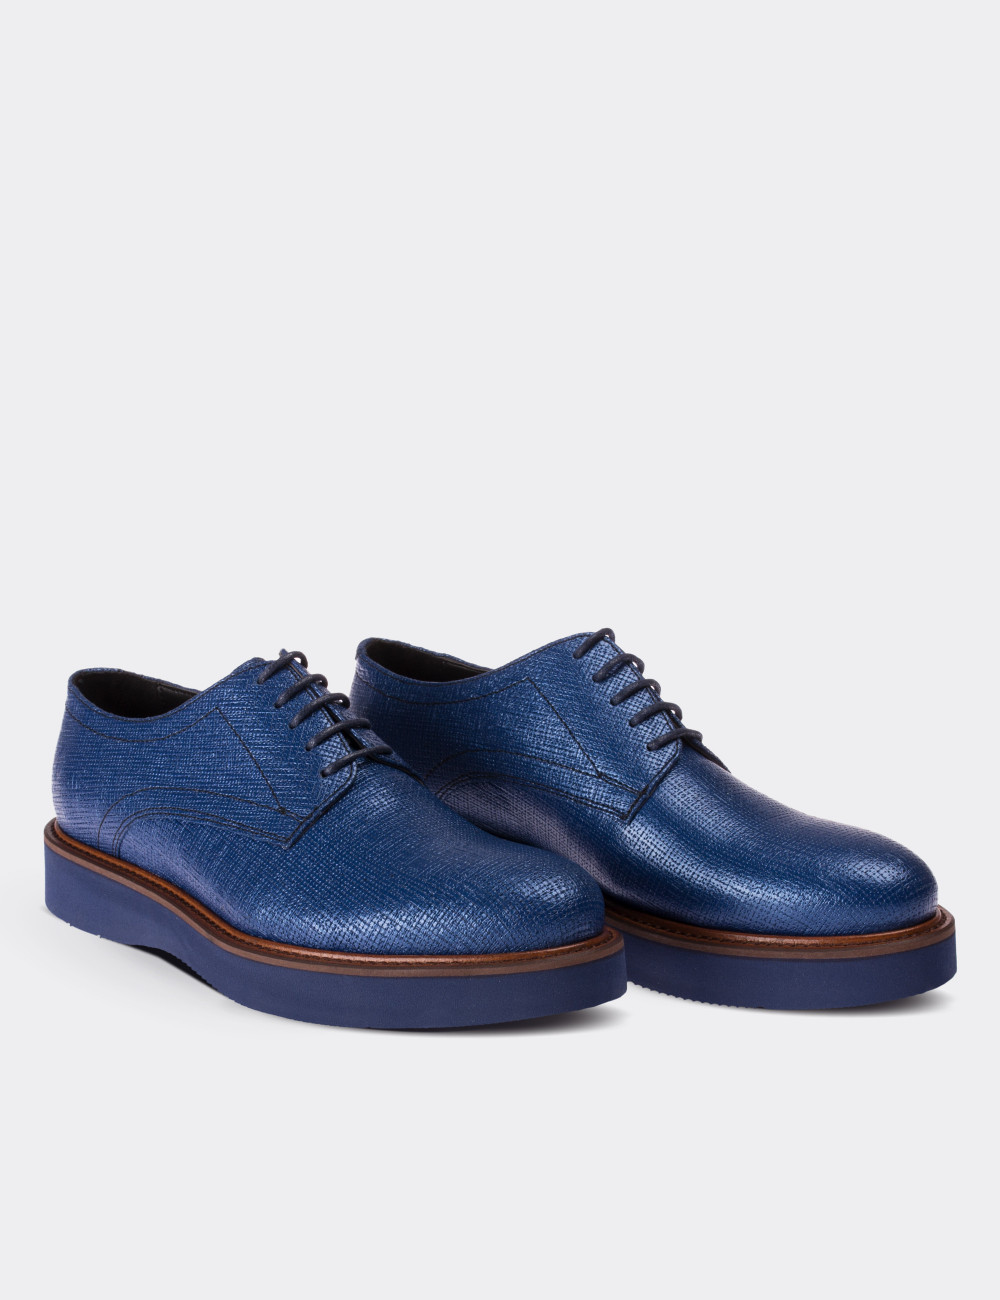 Blue  Leather Lace-up Shoes - 01430ZMVIE01